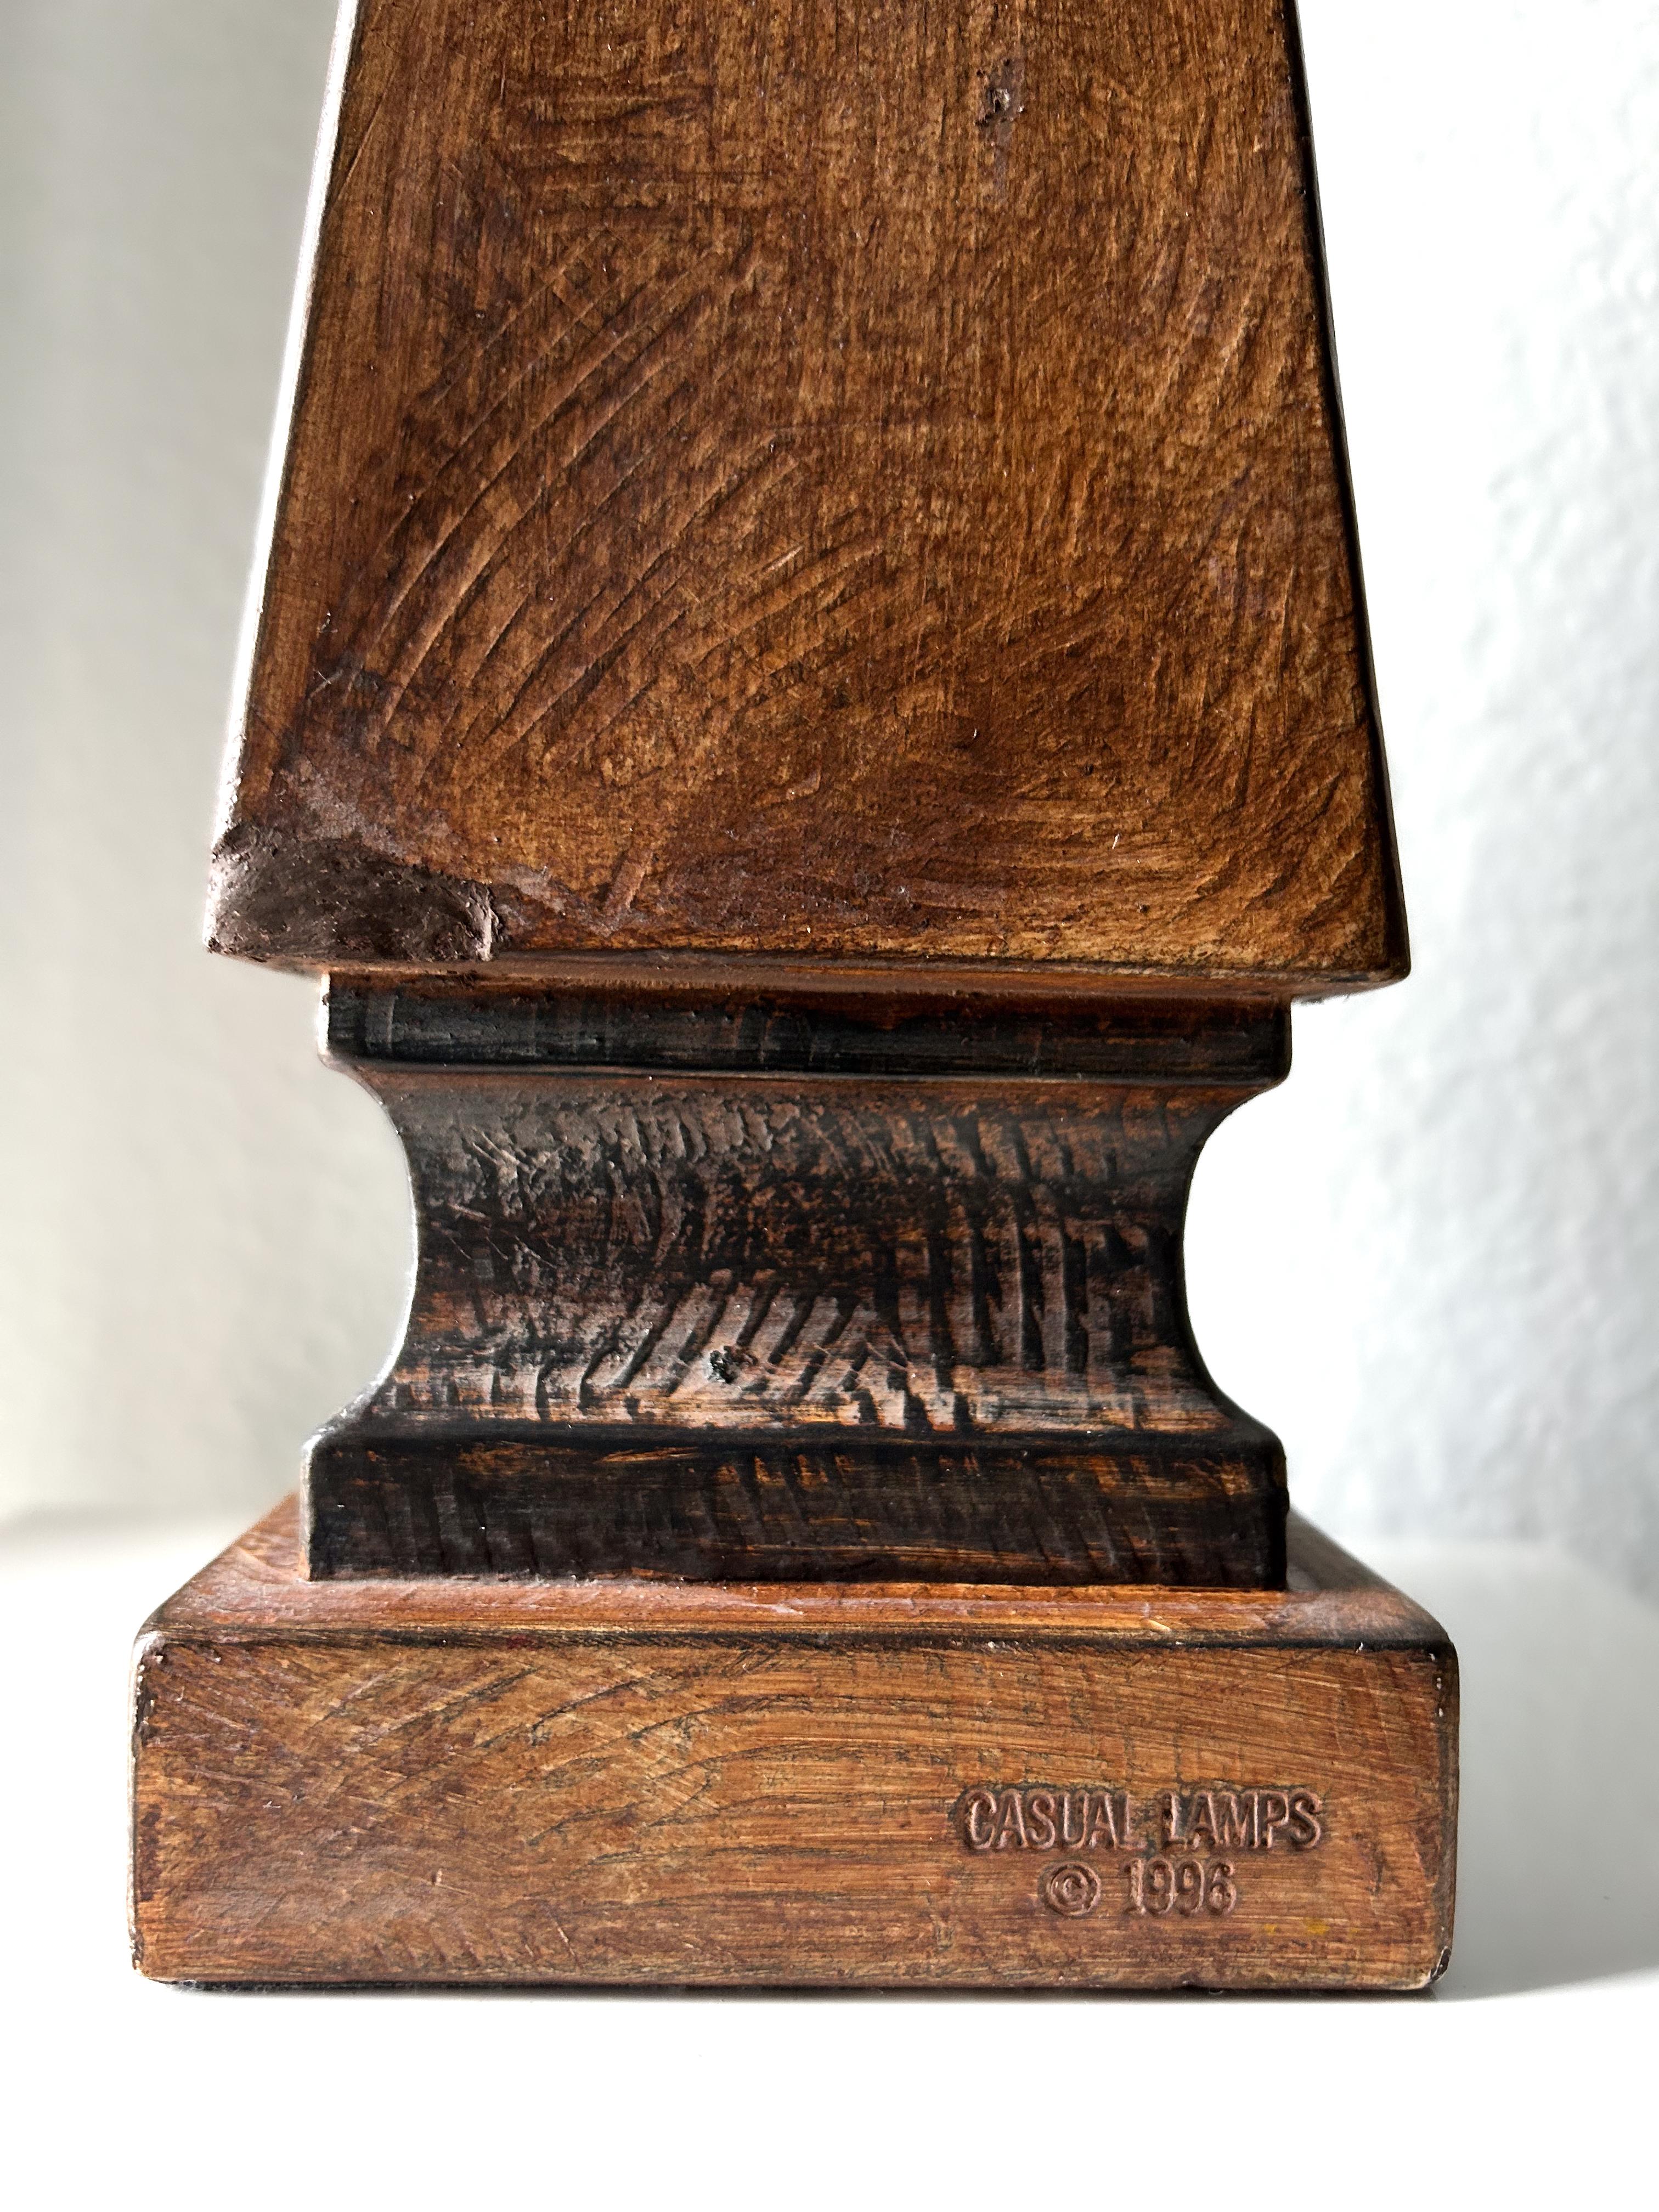 Post-Modern Wooden Obelisk by Casual Lamps of California